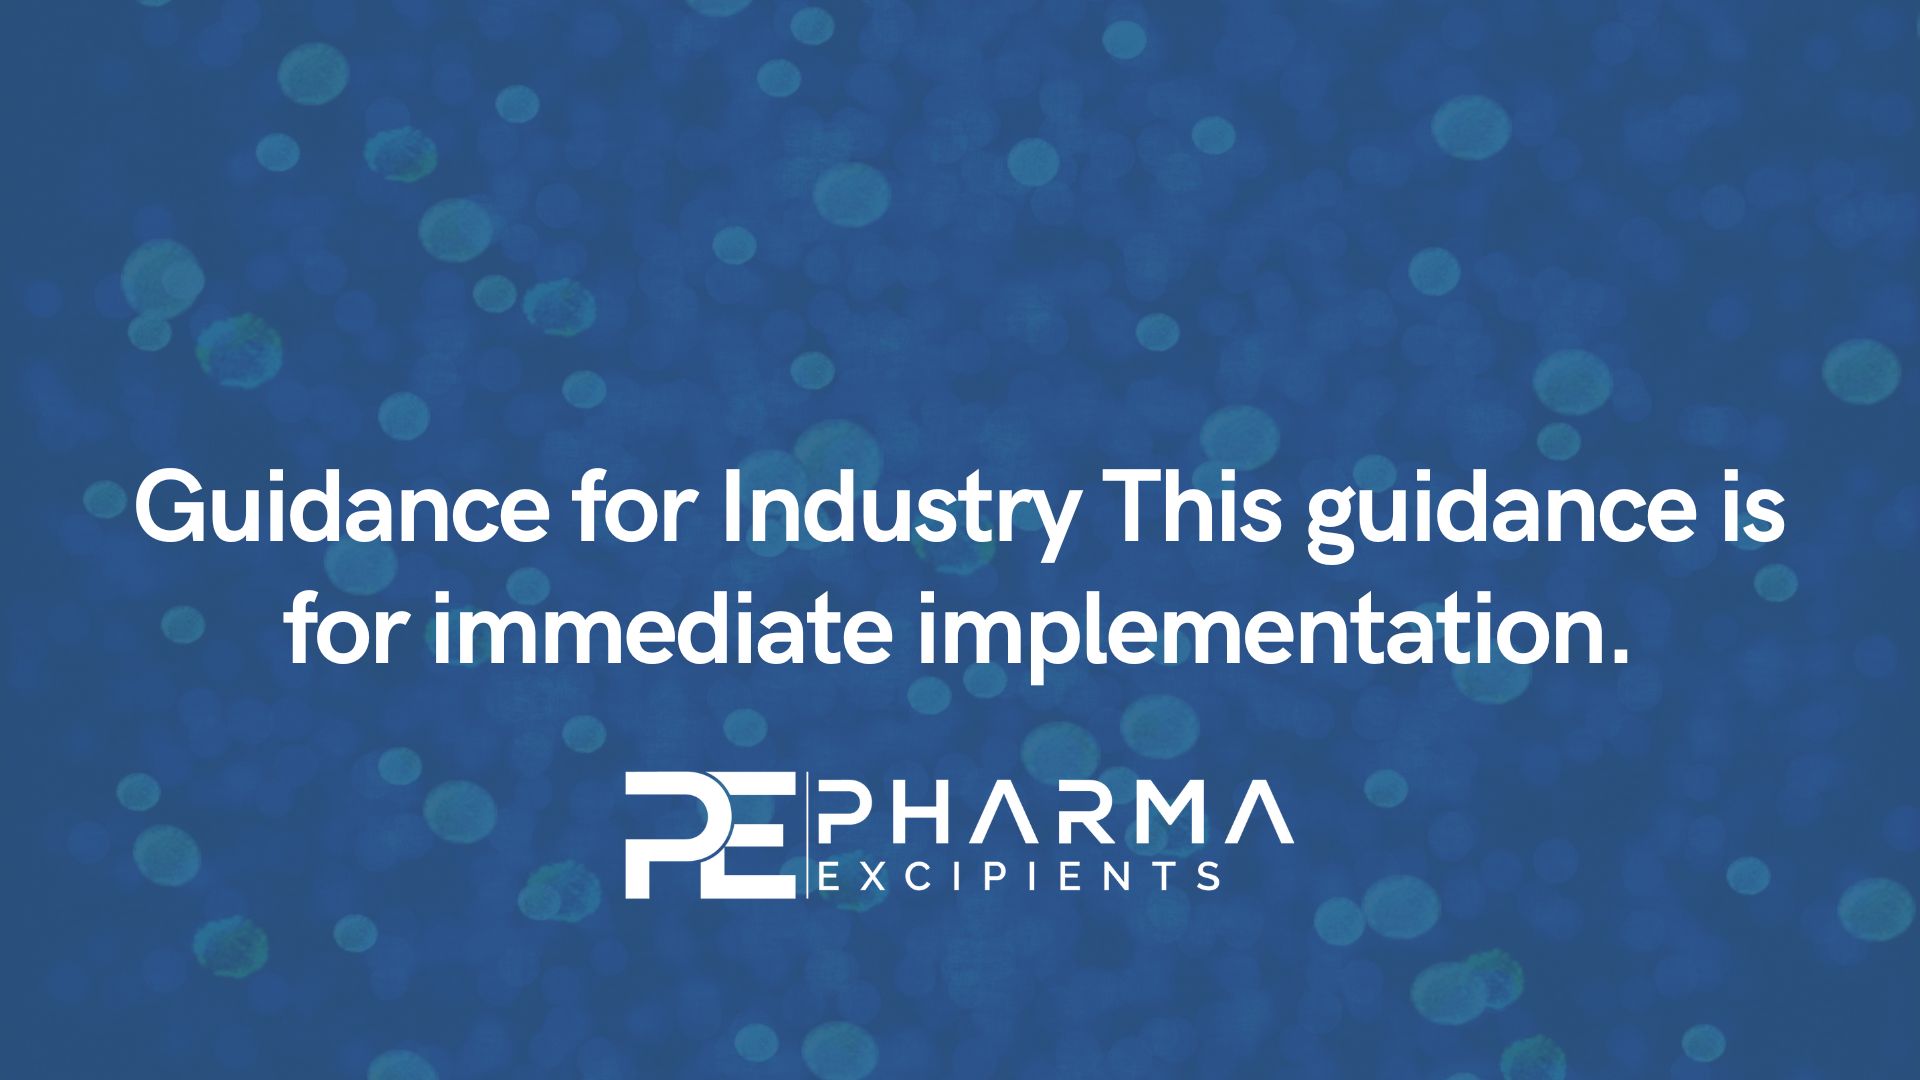 Guidance for Industry This guidance is for immediate implementation.